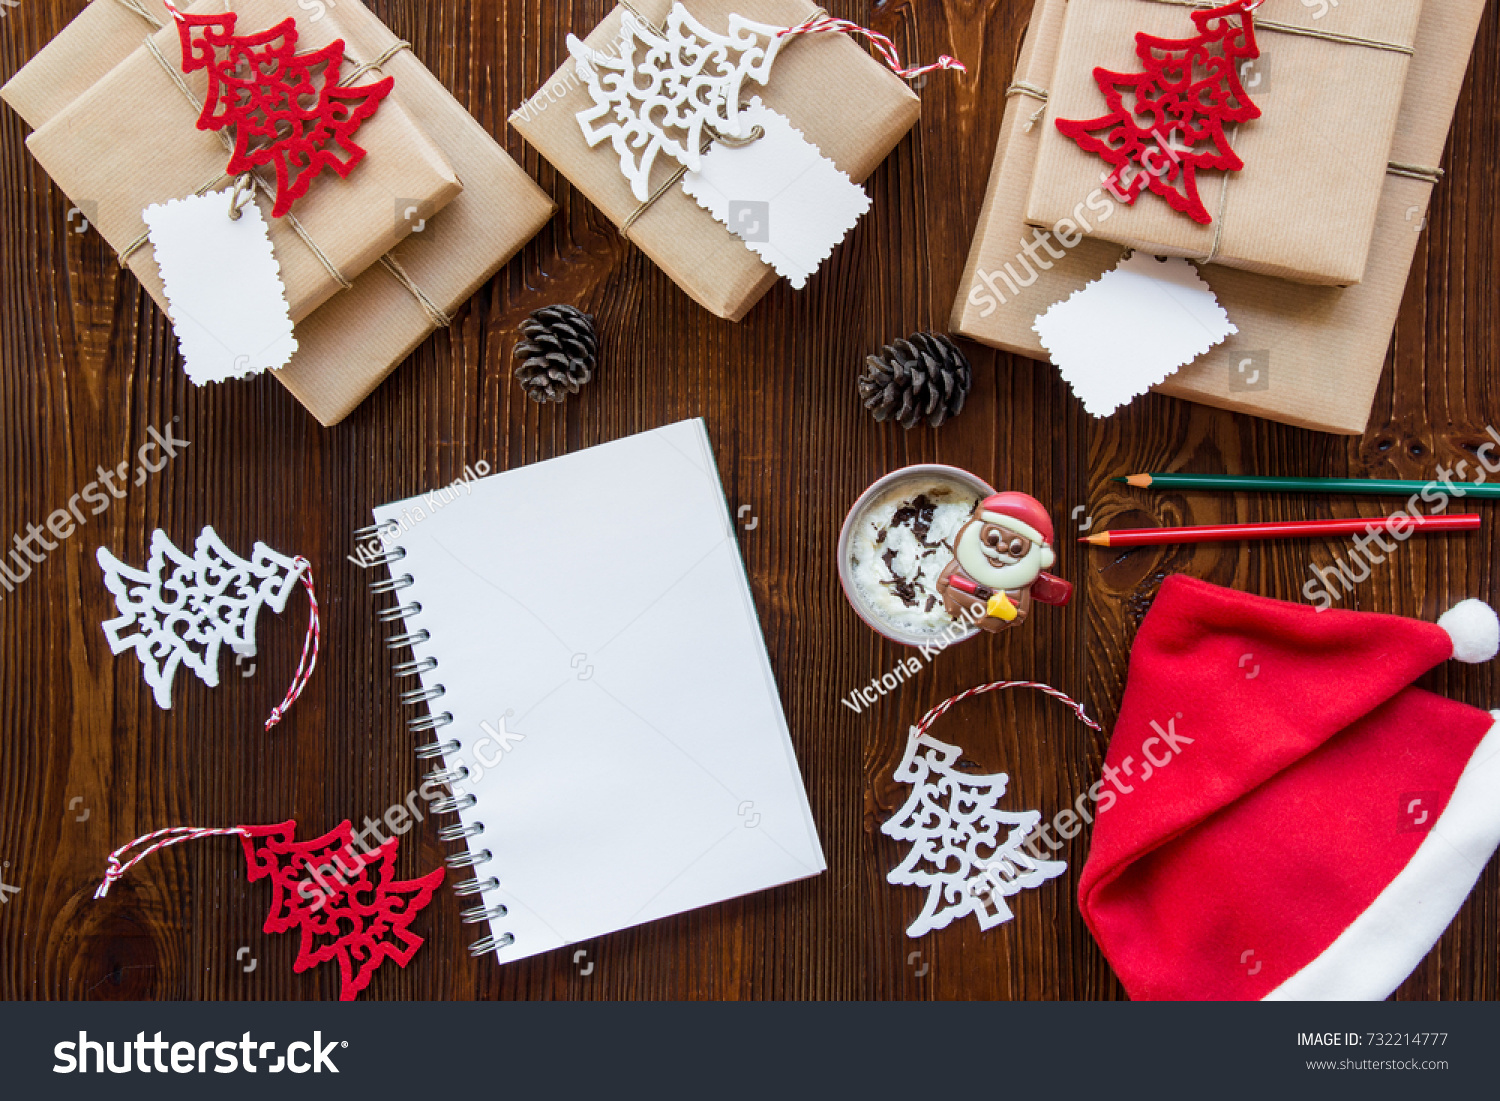 Preparation for the New Year holidays concept, gifts, New Year's decor, notebook, cup of hot chocolate, Santa Claus hat on a wooden background. Horizontal. Top view. #732214777